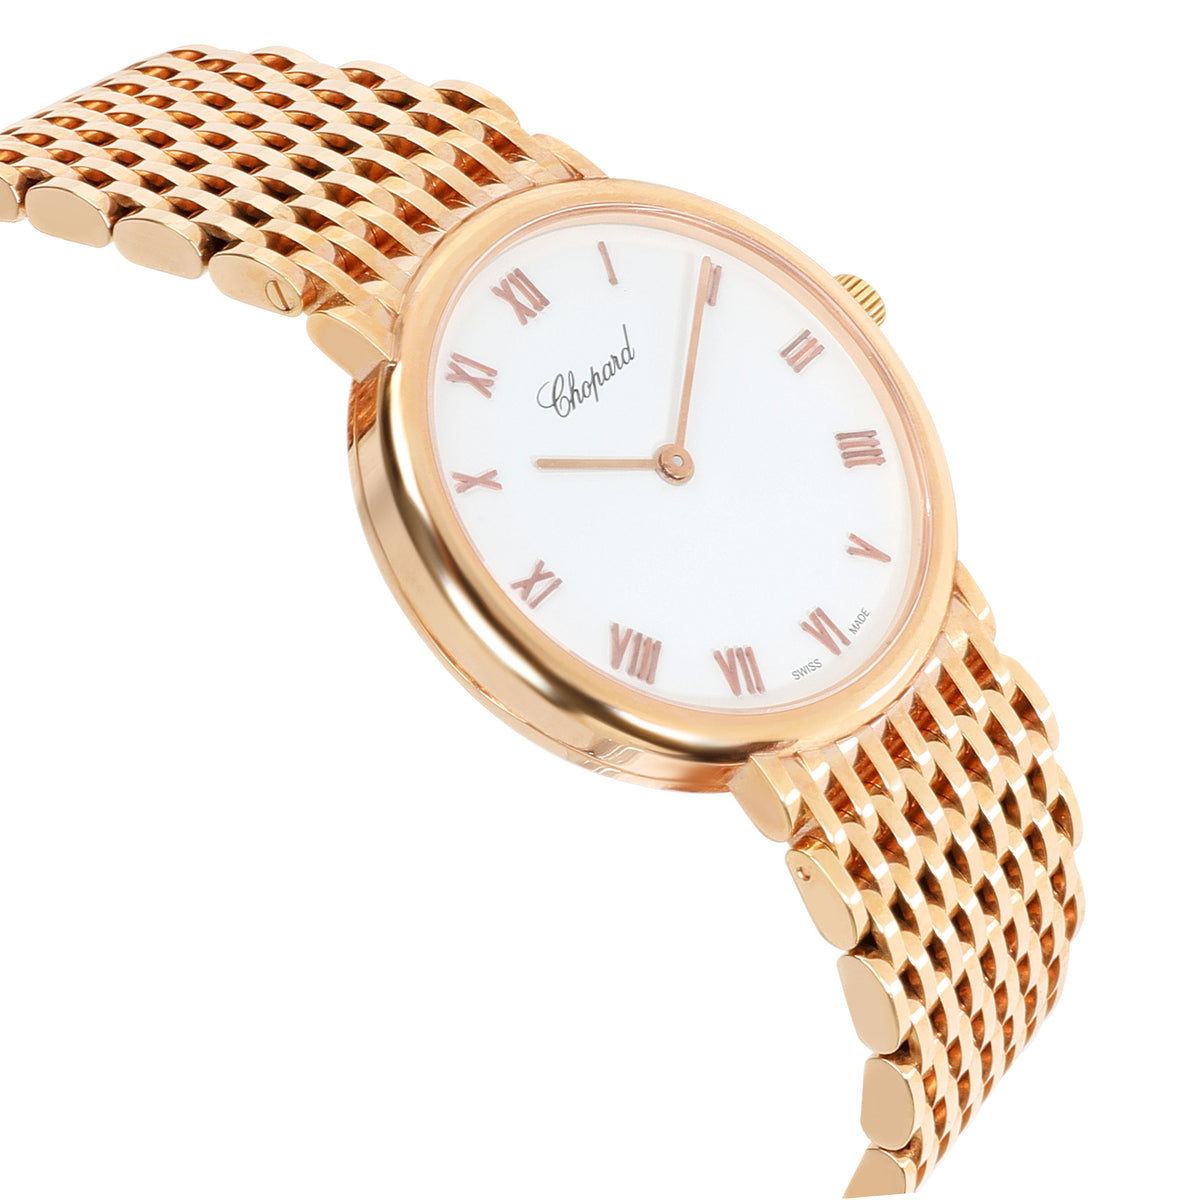 BRAND NEW  Classic 119392-5001 Women's Watch in 18kt Rose Gold